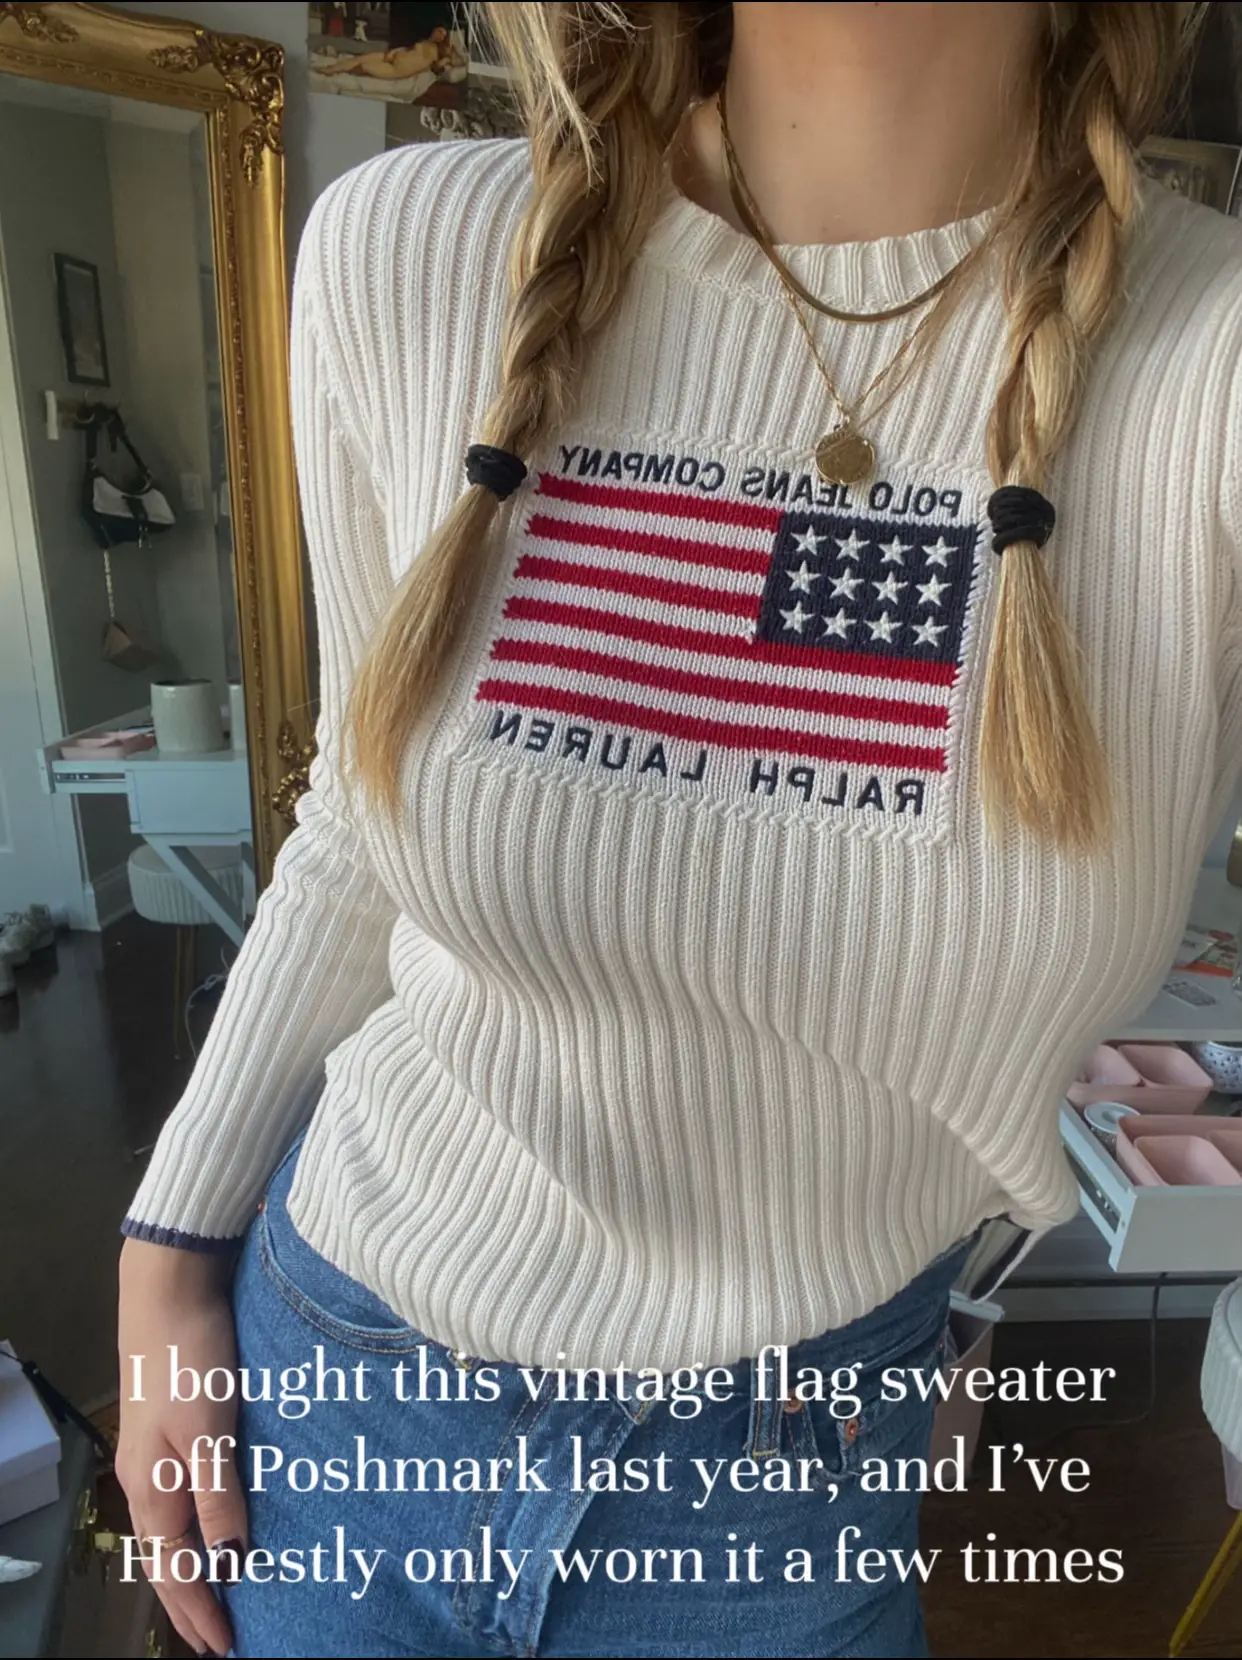 is the RL flag sweater worth it?, Gallery posted by michelle.belle